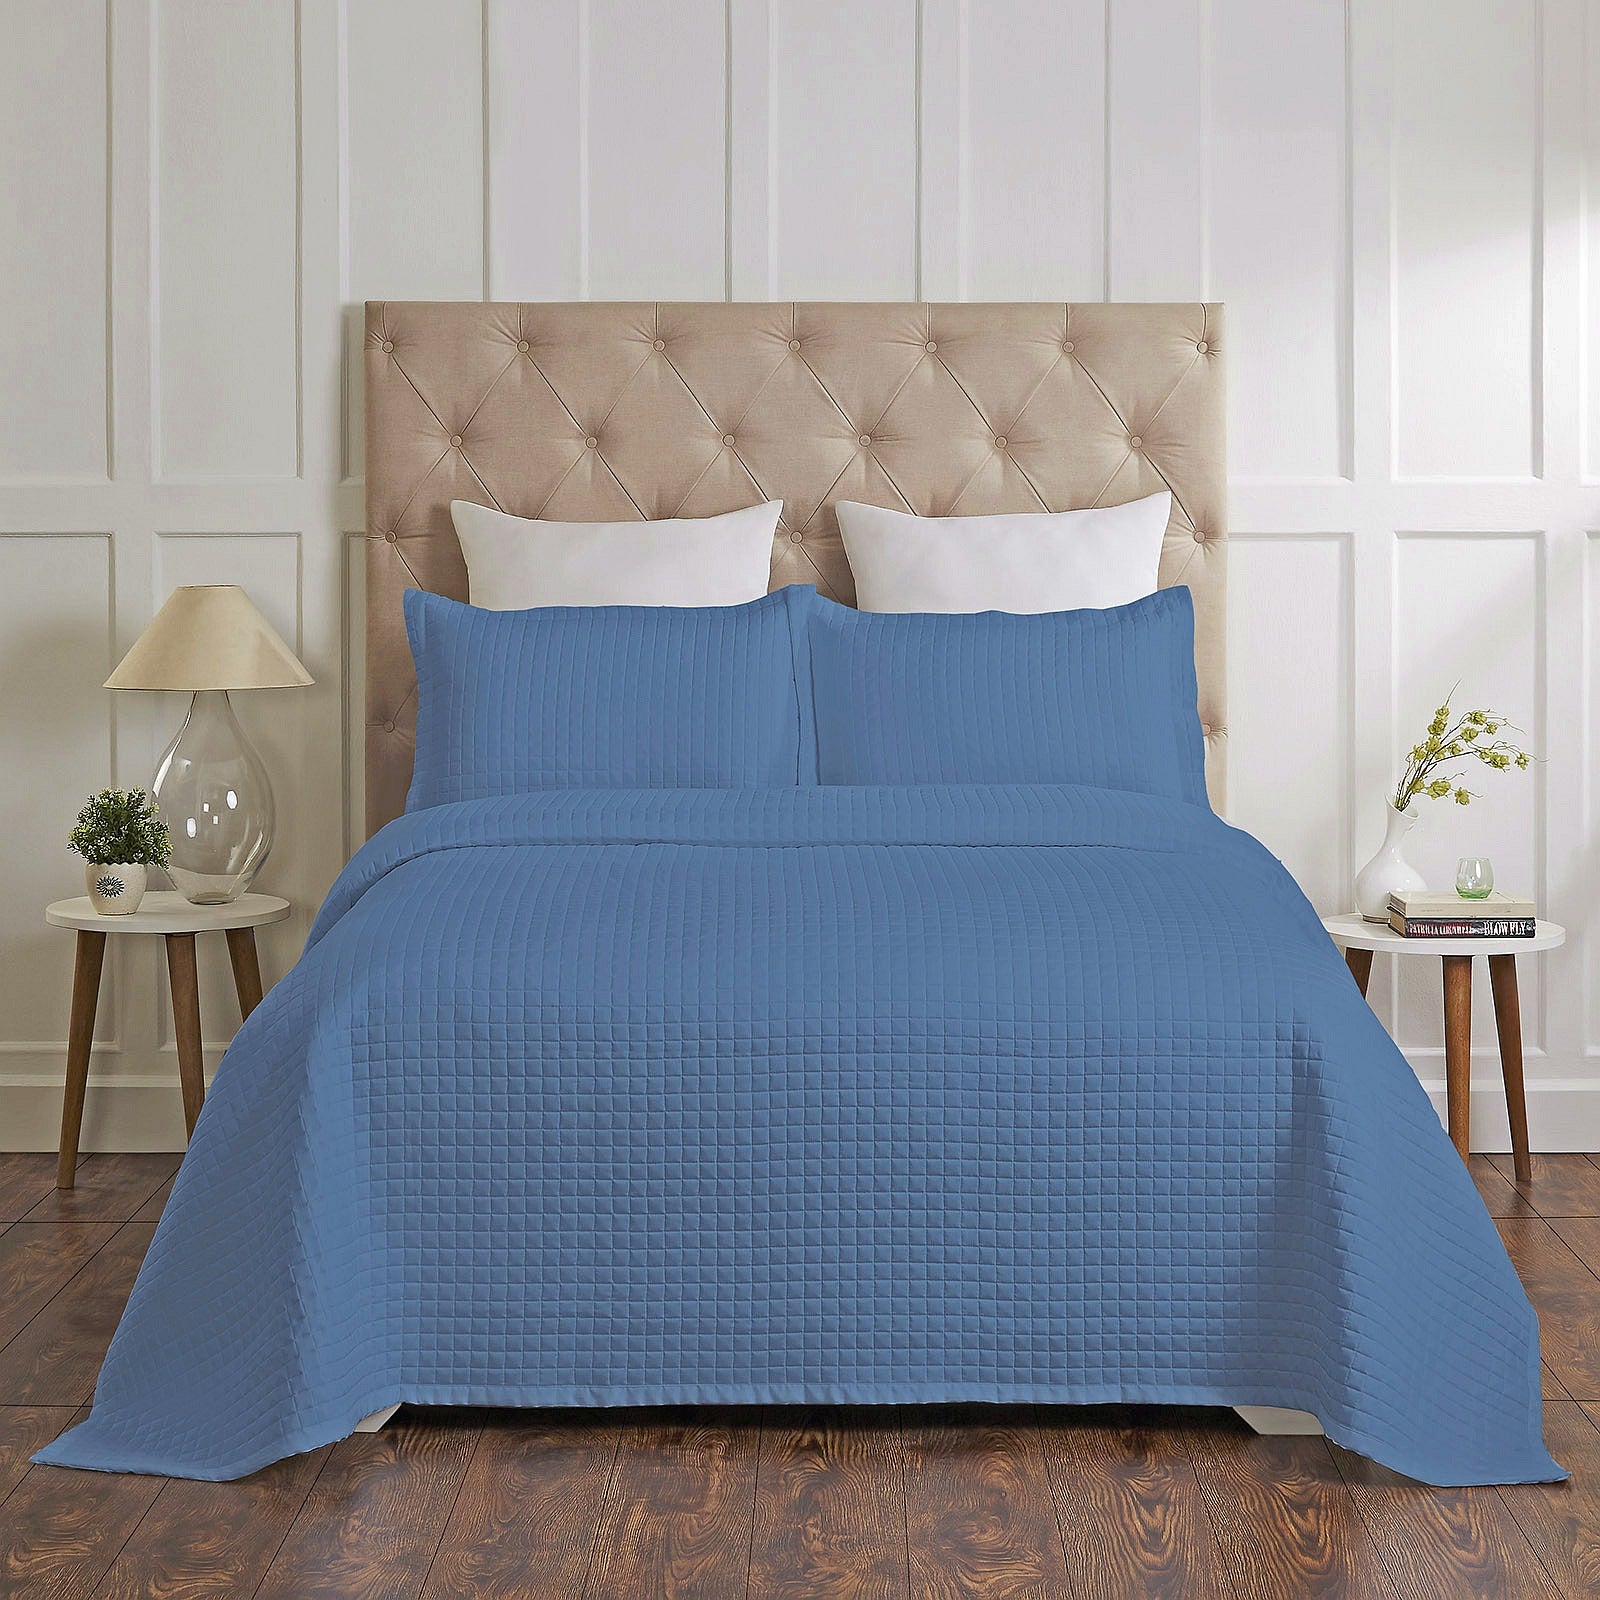 Renee Taylor Madrid Cotton Quilted Coverlet Set Blue Buy Queen